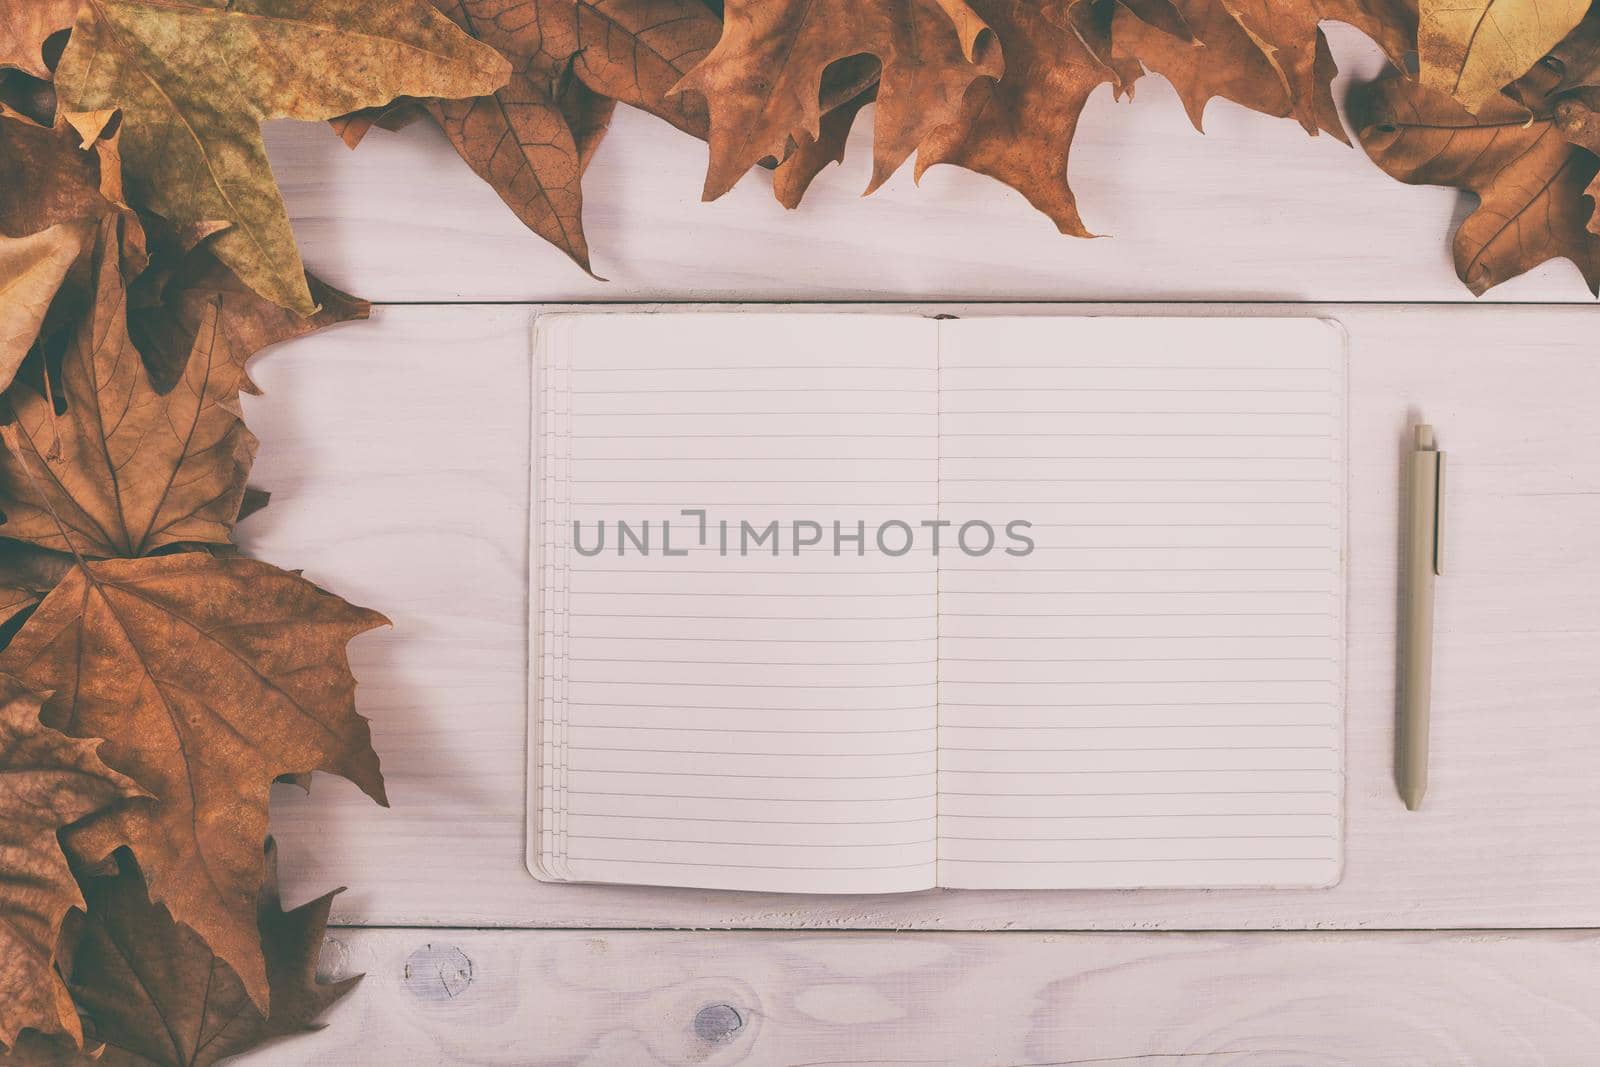 Empty notebook and pen on wooden table with autumn leaves.Image is intentionally toned.